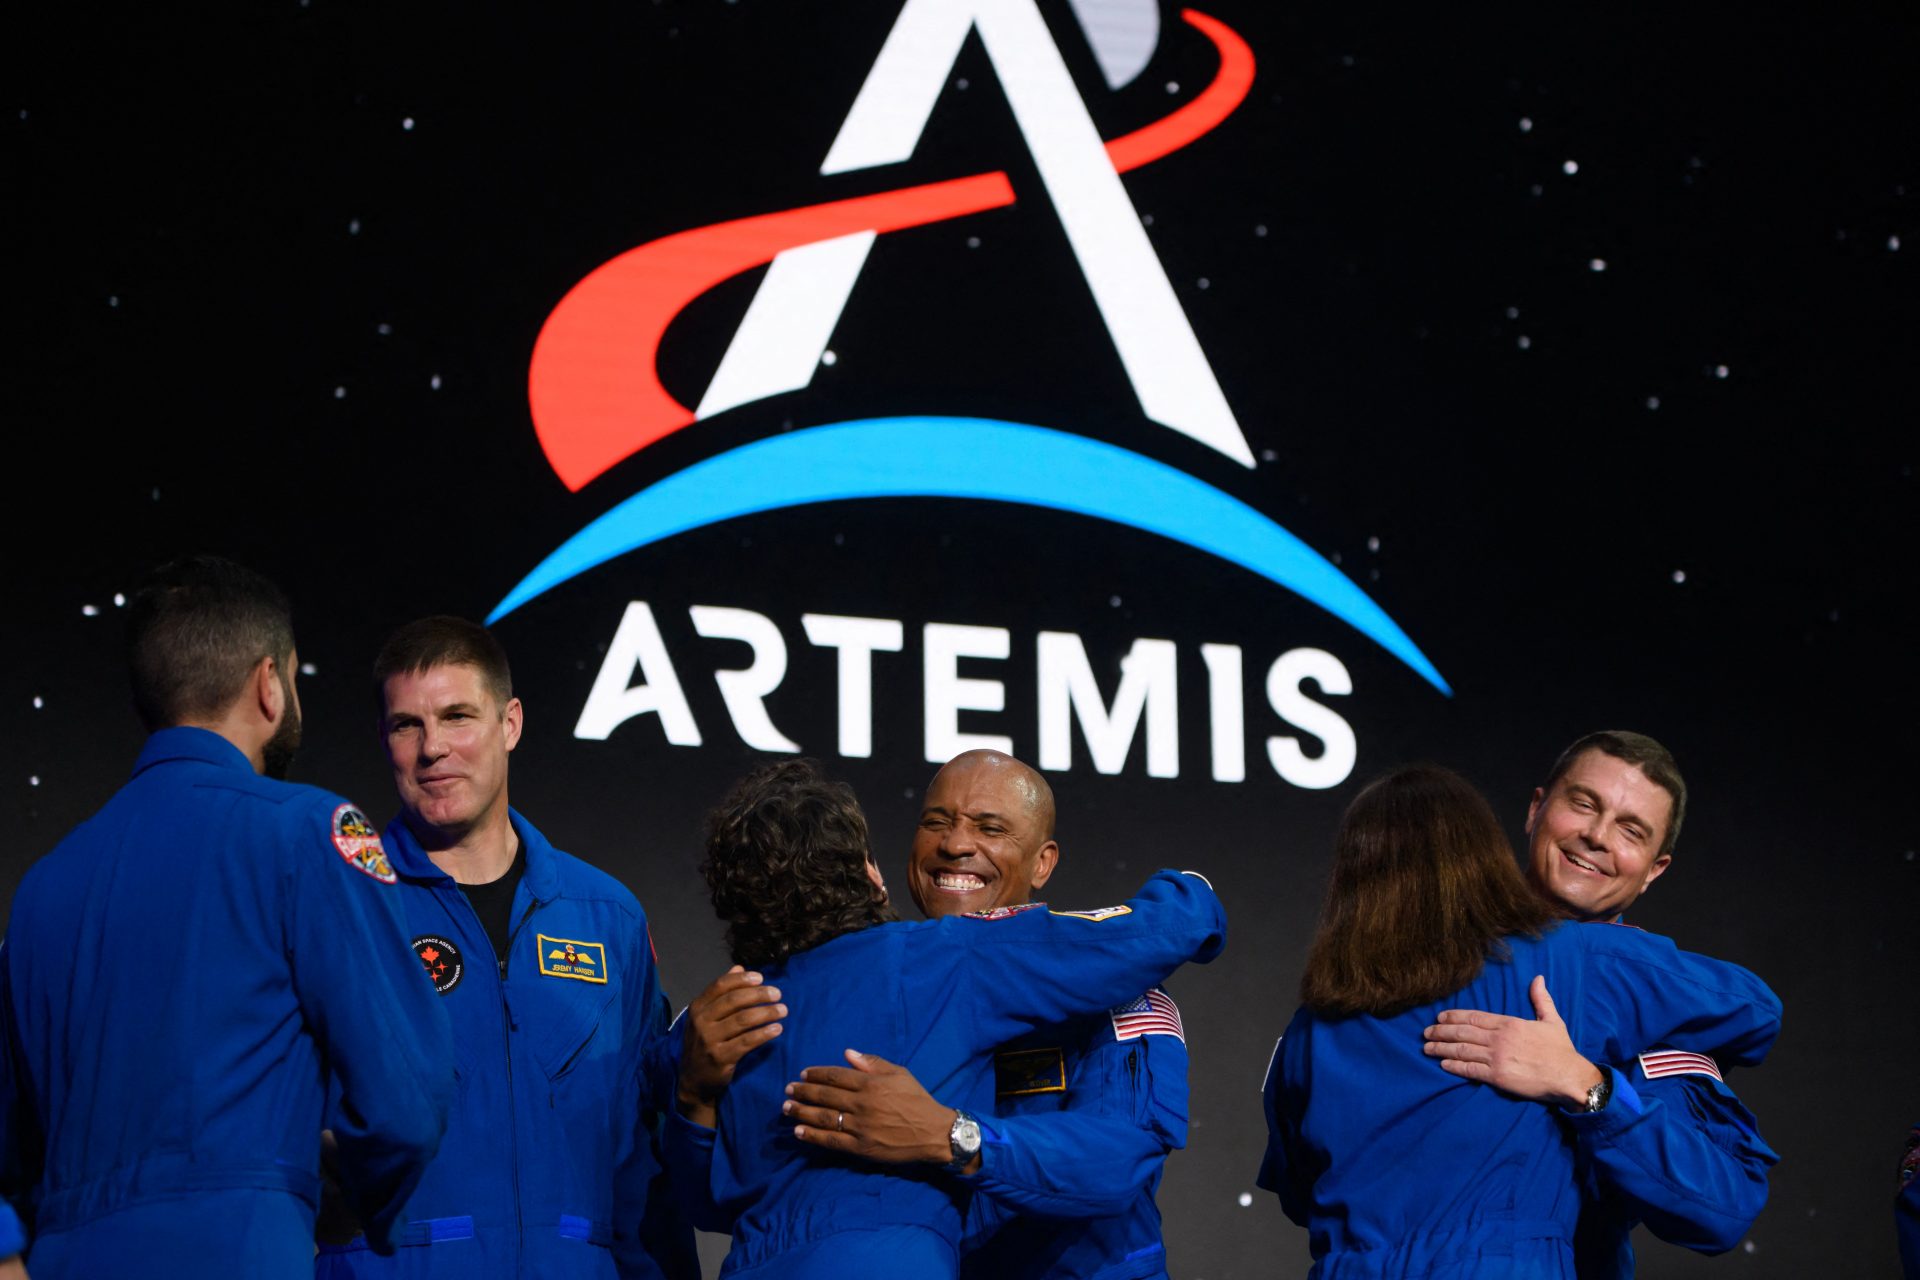 Let's look at the Artemis III mission 